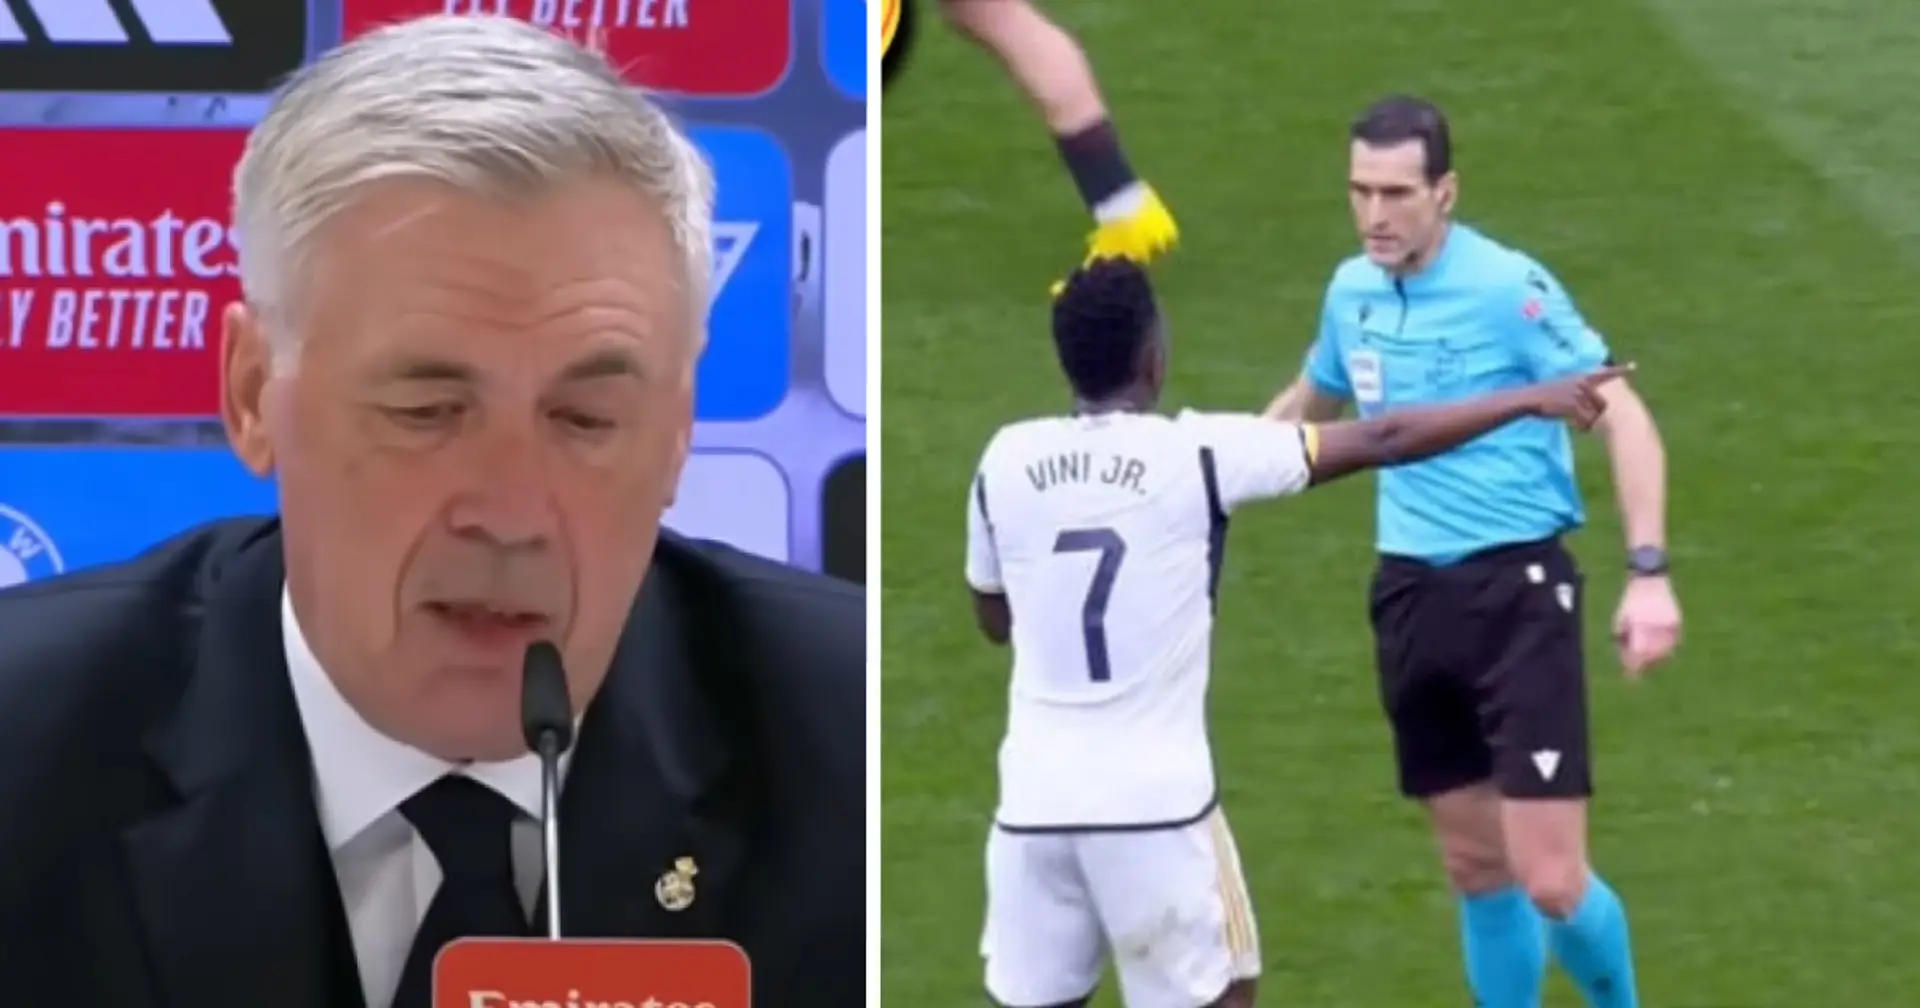 'To shut up': Ancelotti says one player has learned to deal with La Liga referees, not Vinicius